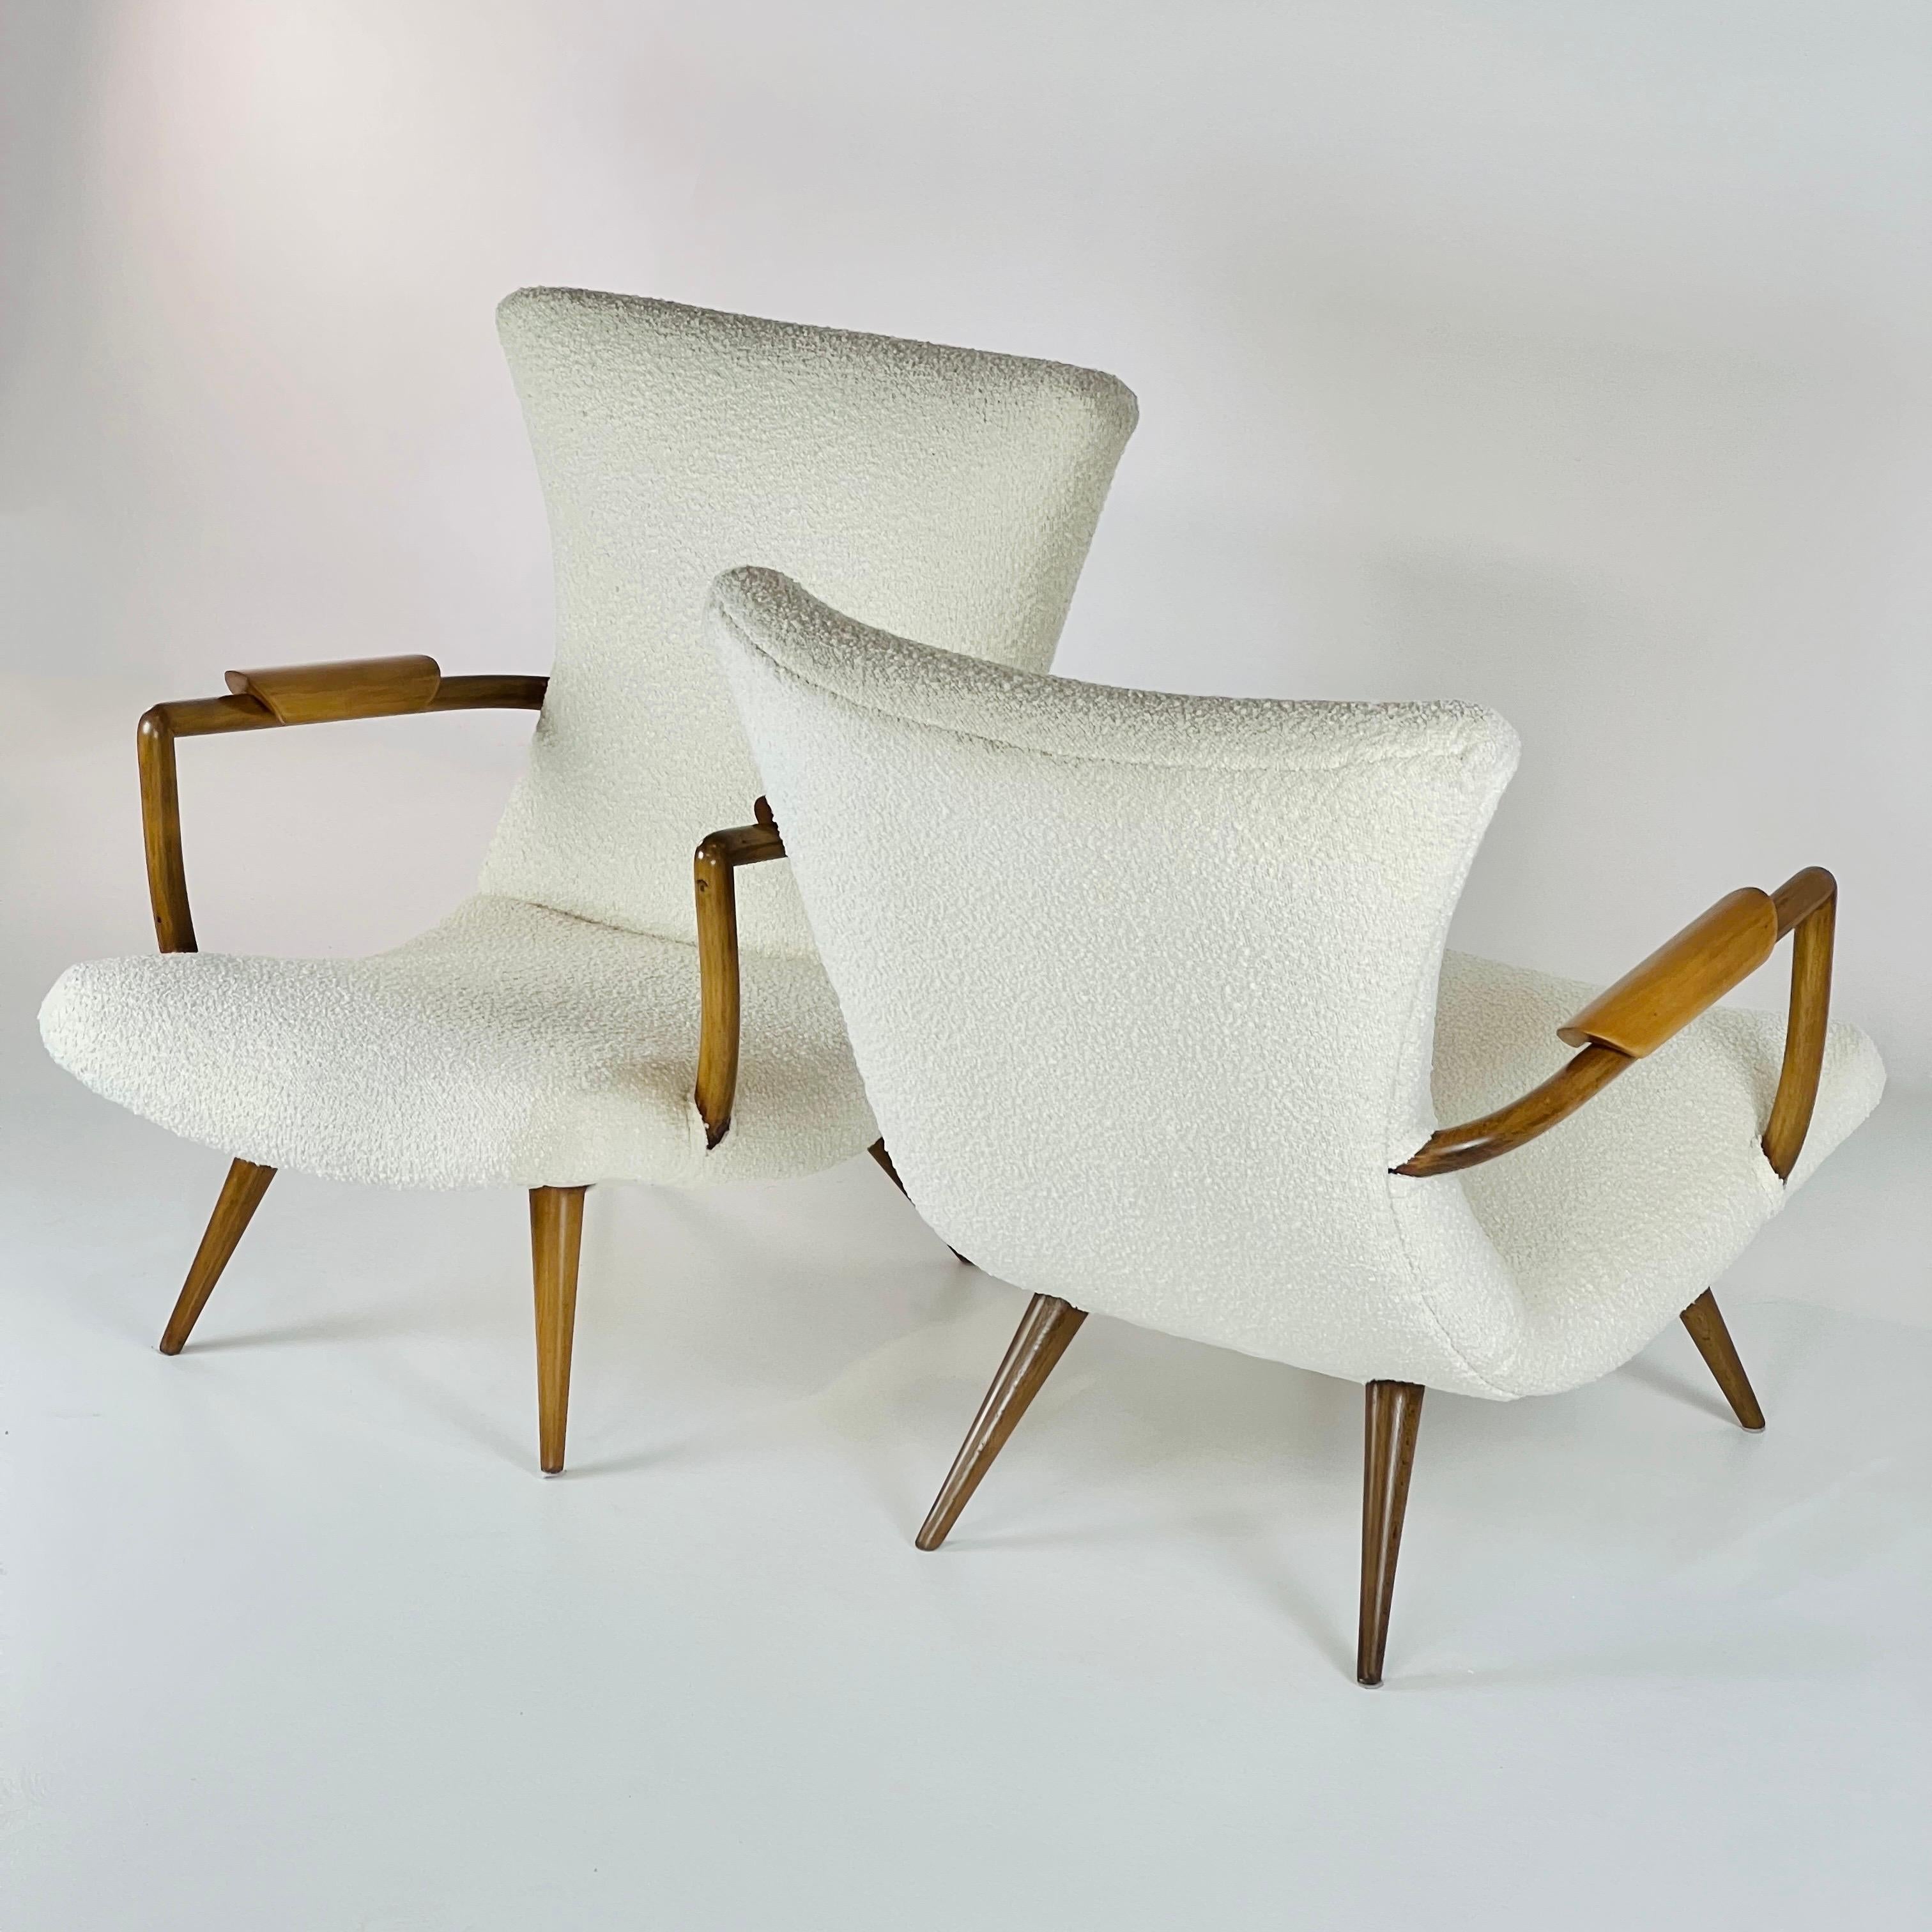 Brazilian Pair of Lounge Chairs in Caviúna Wood Brazil 1950s Designer Giuseppe Scapinelli